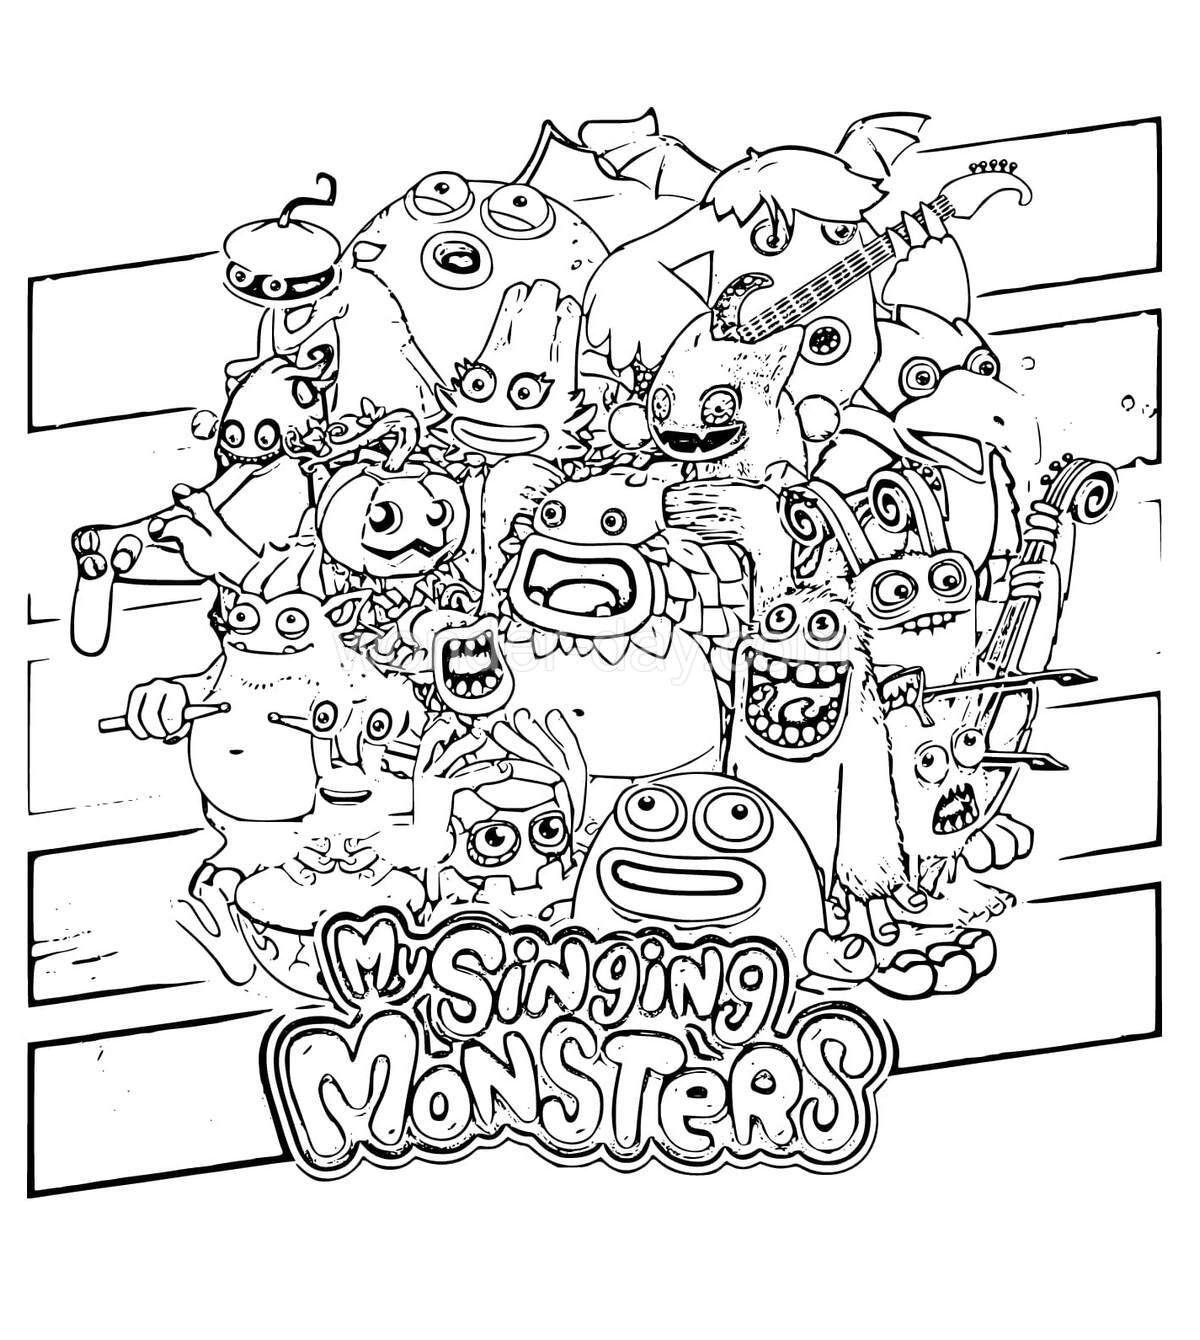 My Singing Monsters Coloring Pages WONDER DAY Coloring Pages For Children And Adults Monster Coloring Pages Singing Monsters Coloring Pages